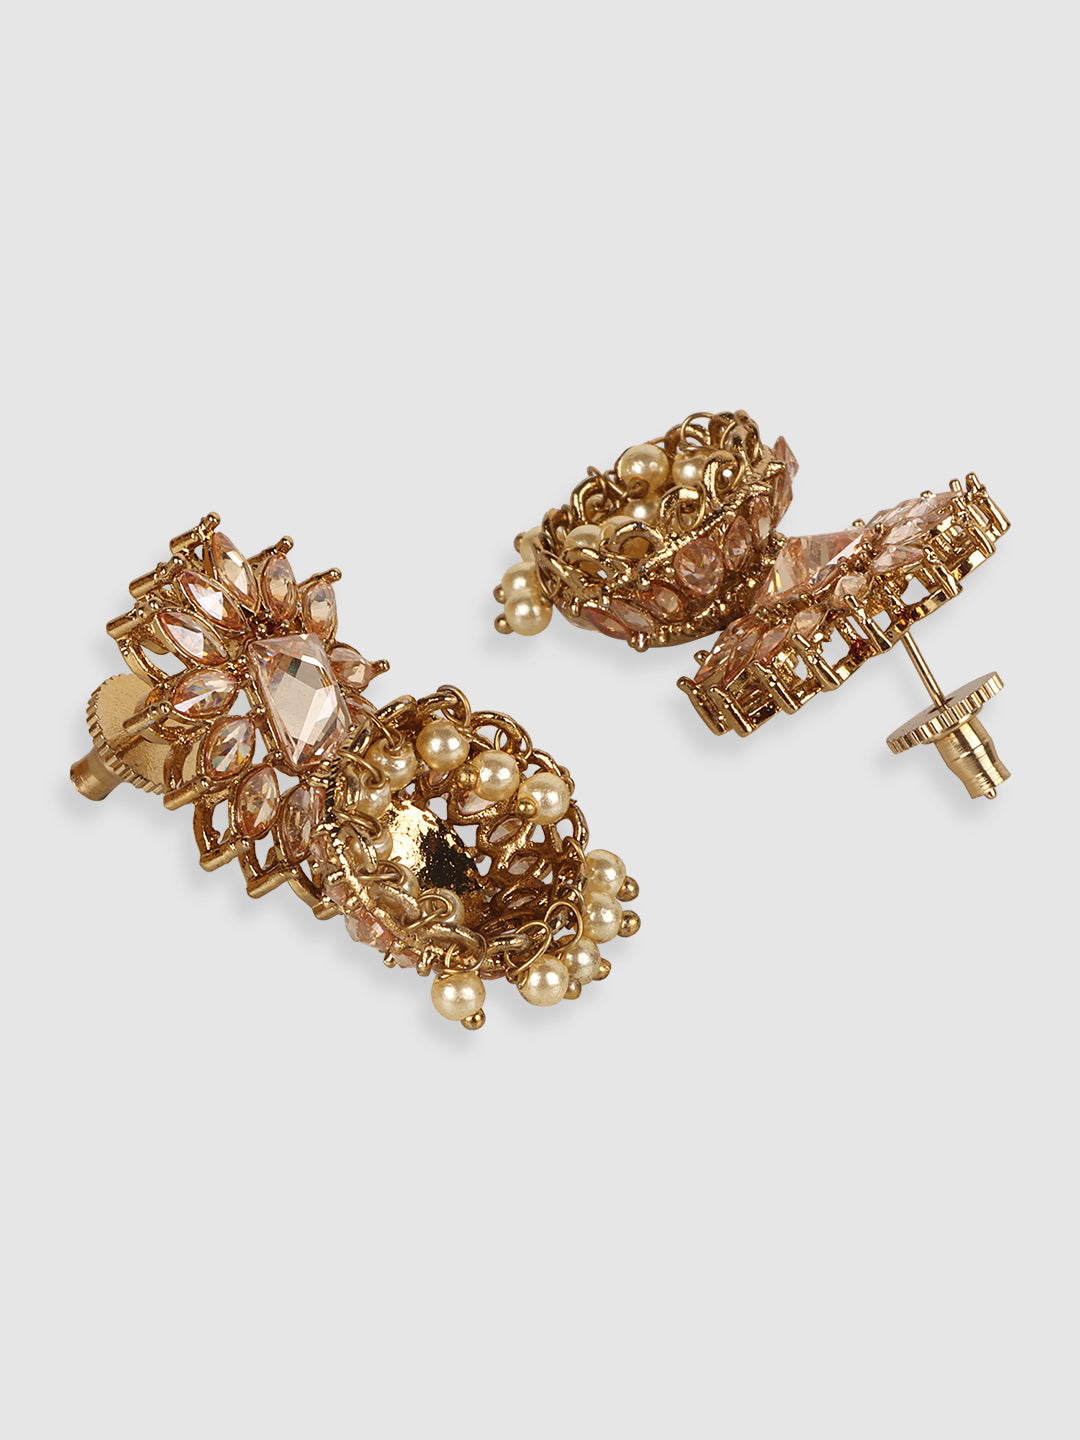 Gold-Plated Floral Artificial Stones Jhumkas Earrings